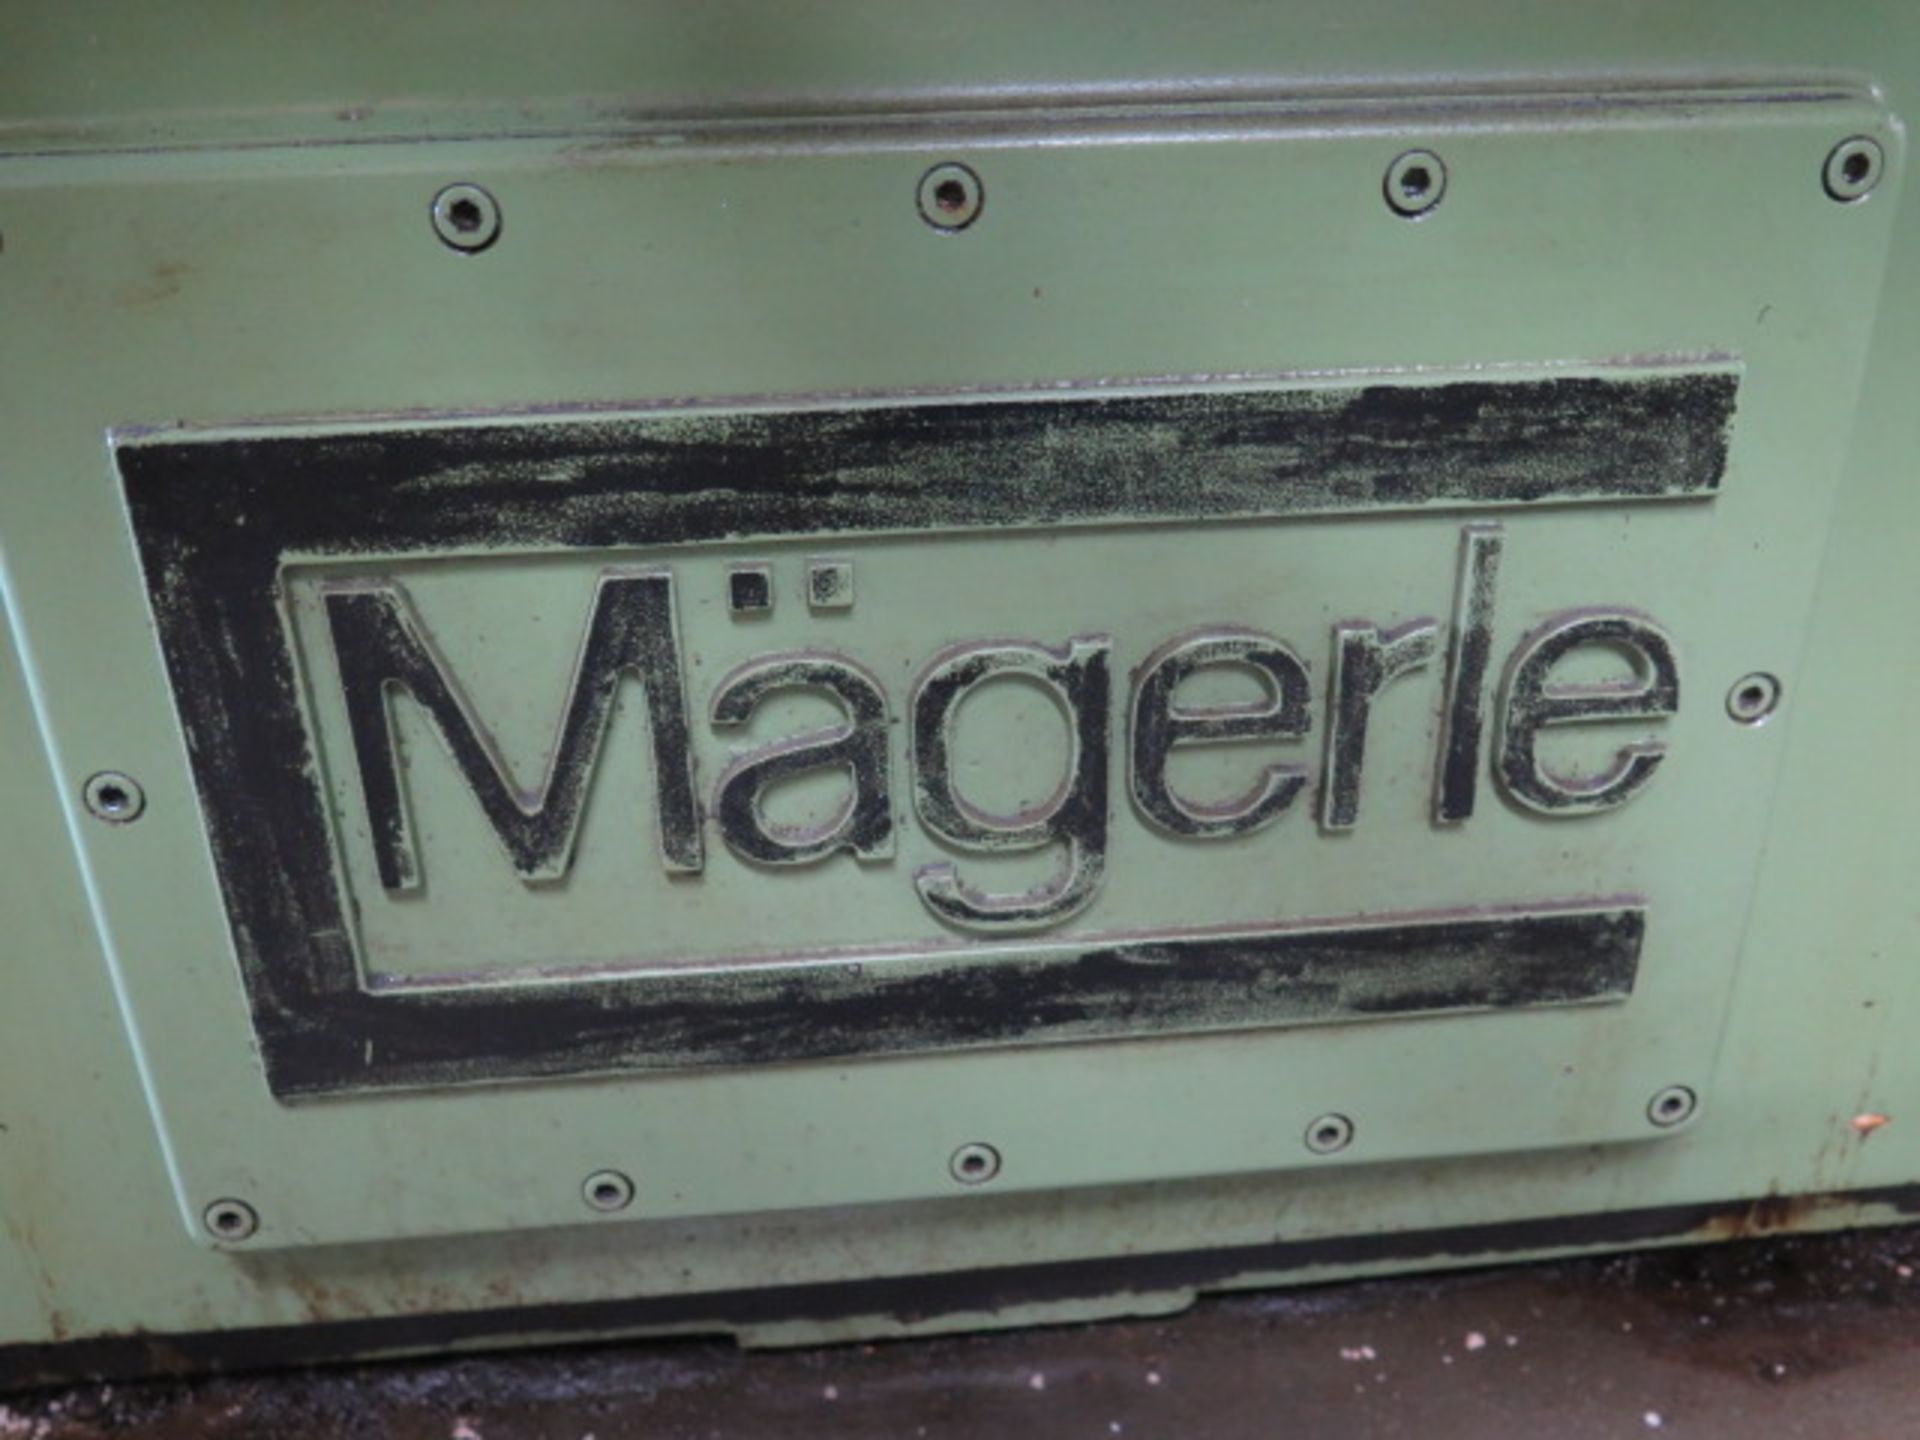 Magerle Type FP-10-S1 10" x 40" Auto Hydr Surface Grinder s/n 965 w/ Magerle Controls, SOLD AS IS - Image 21 of 22